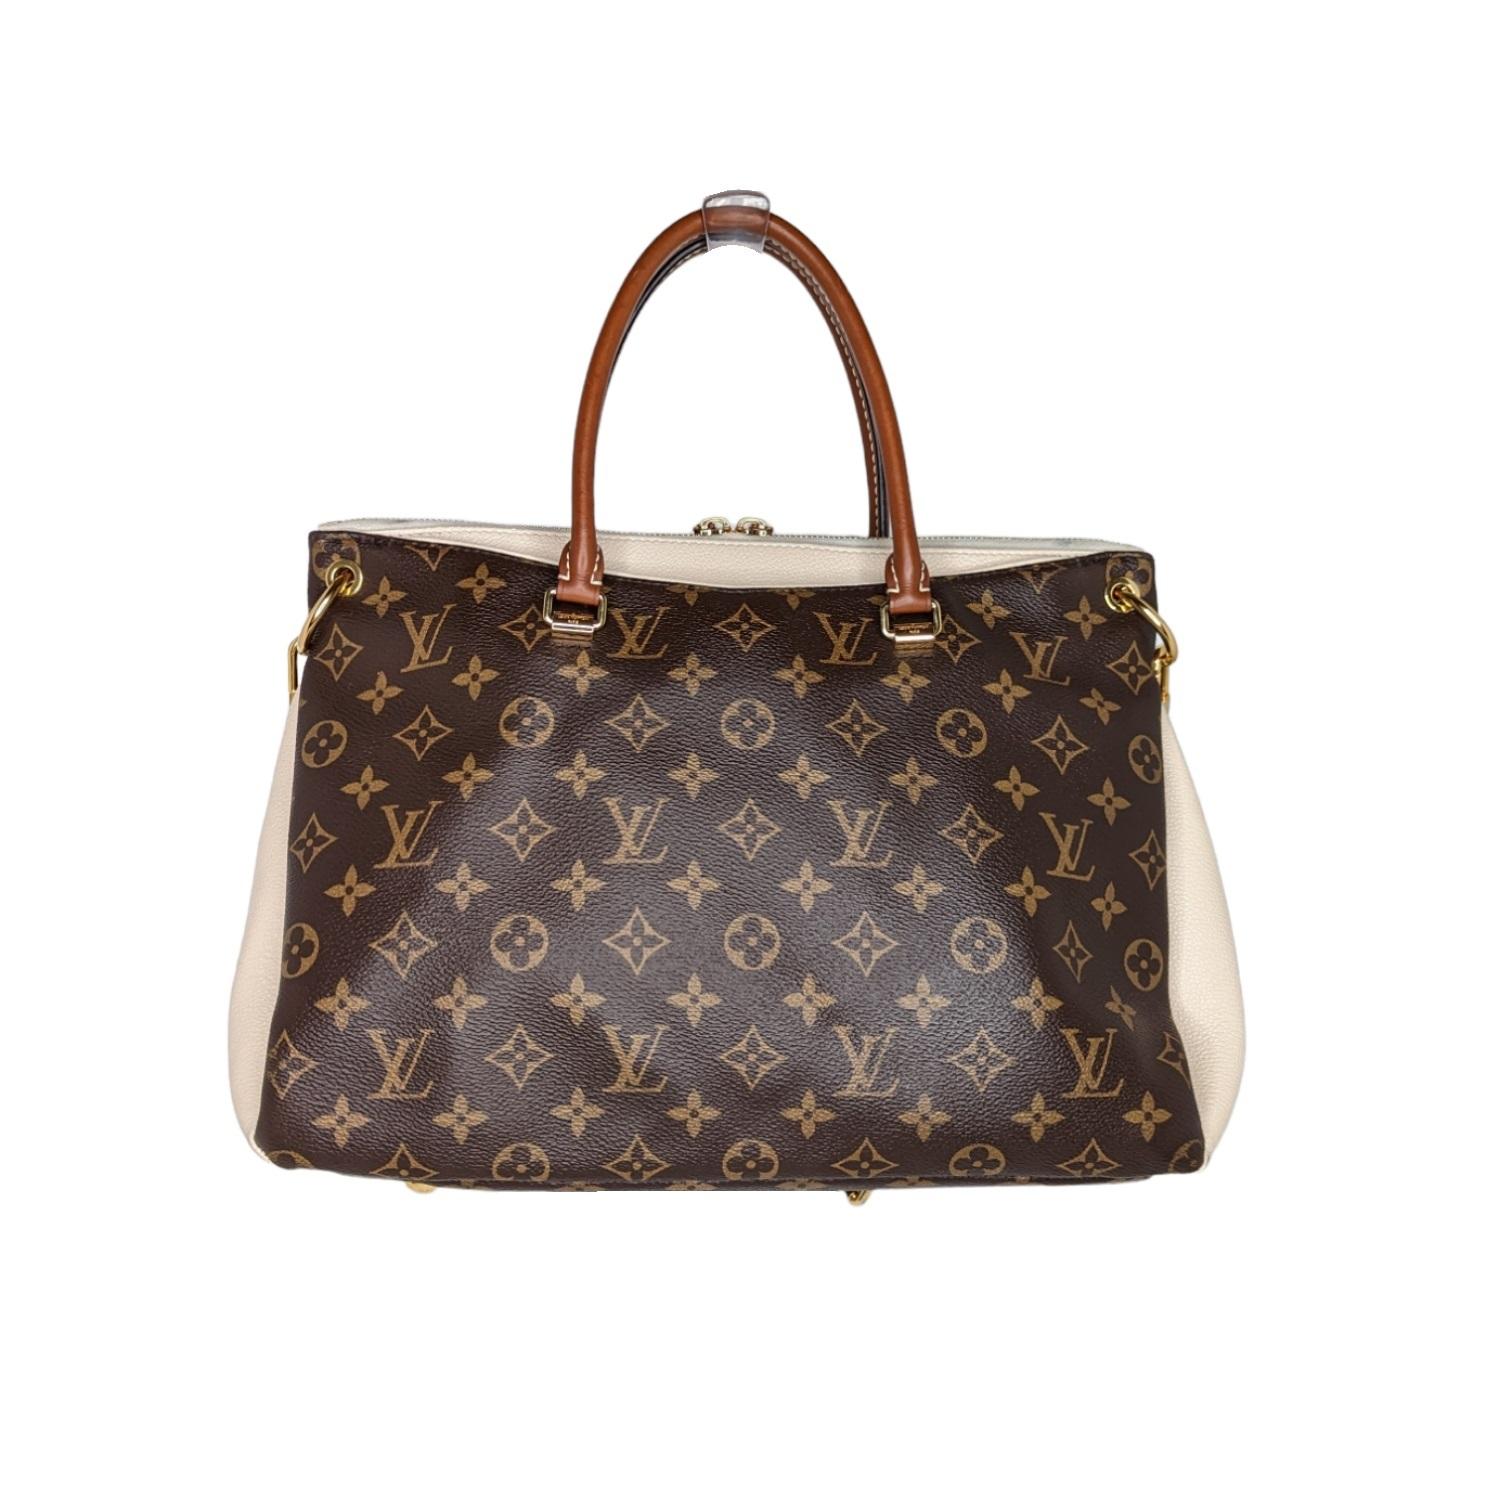 Brown and tan monogram coated canvas Louis Vuitton Pallas tote with brass hardware, single flat shoulder strap featuring buckle adjustment, dual rolled top handles, tan Vachetta and creme leather trim, protective feet at base, dual exterior pockets